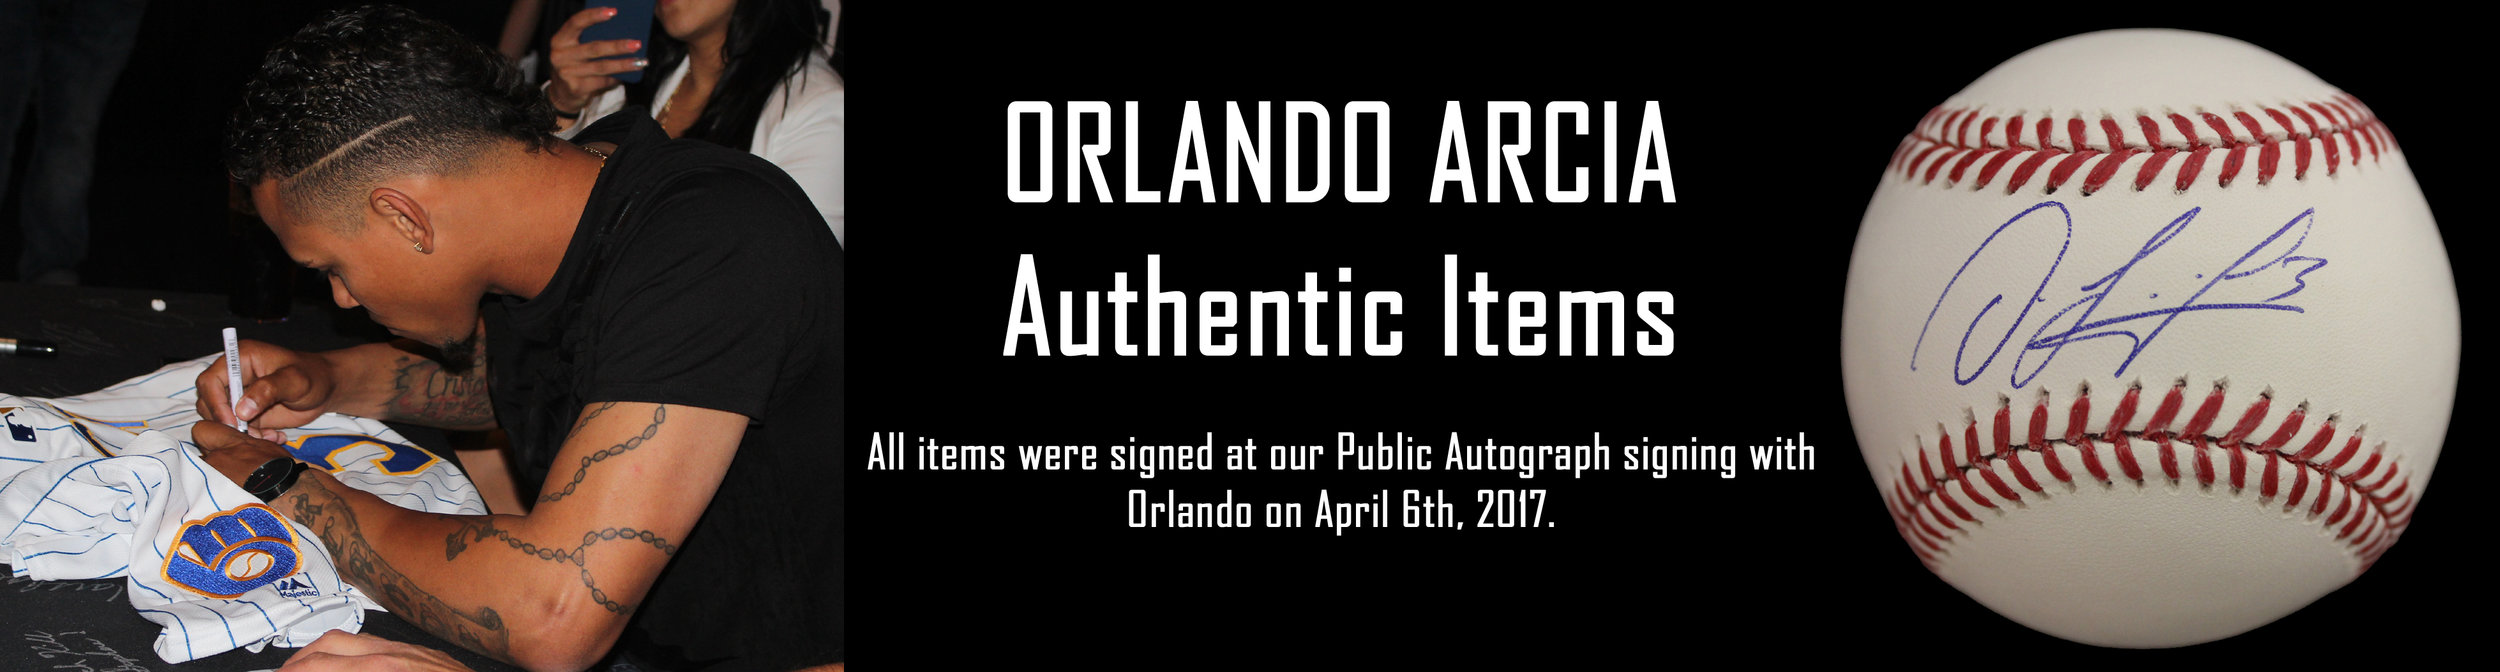 Orlando Arcia MLB Authenticated, Game Worn, and Autographed City